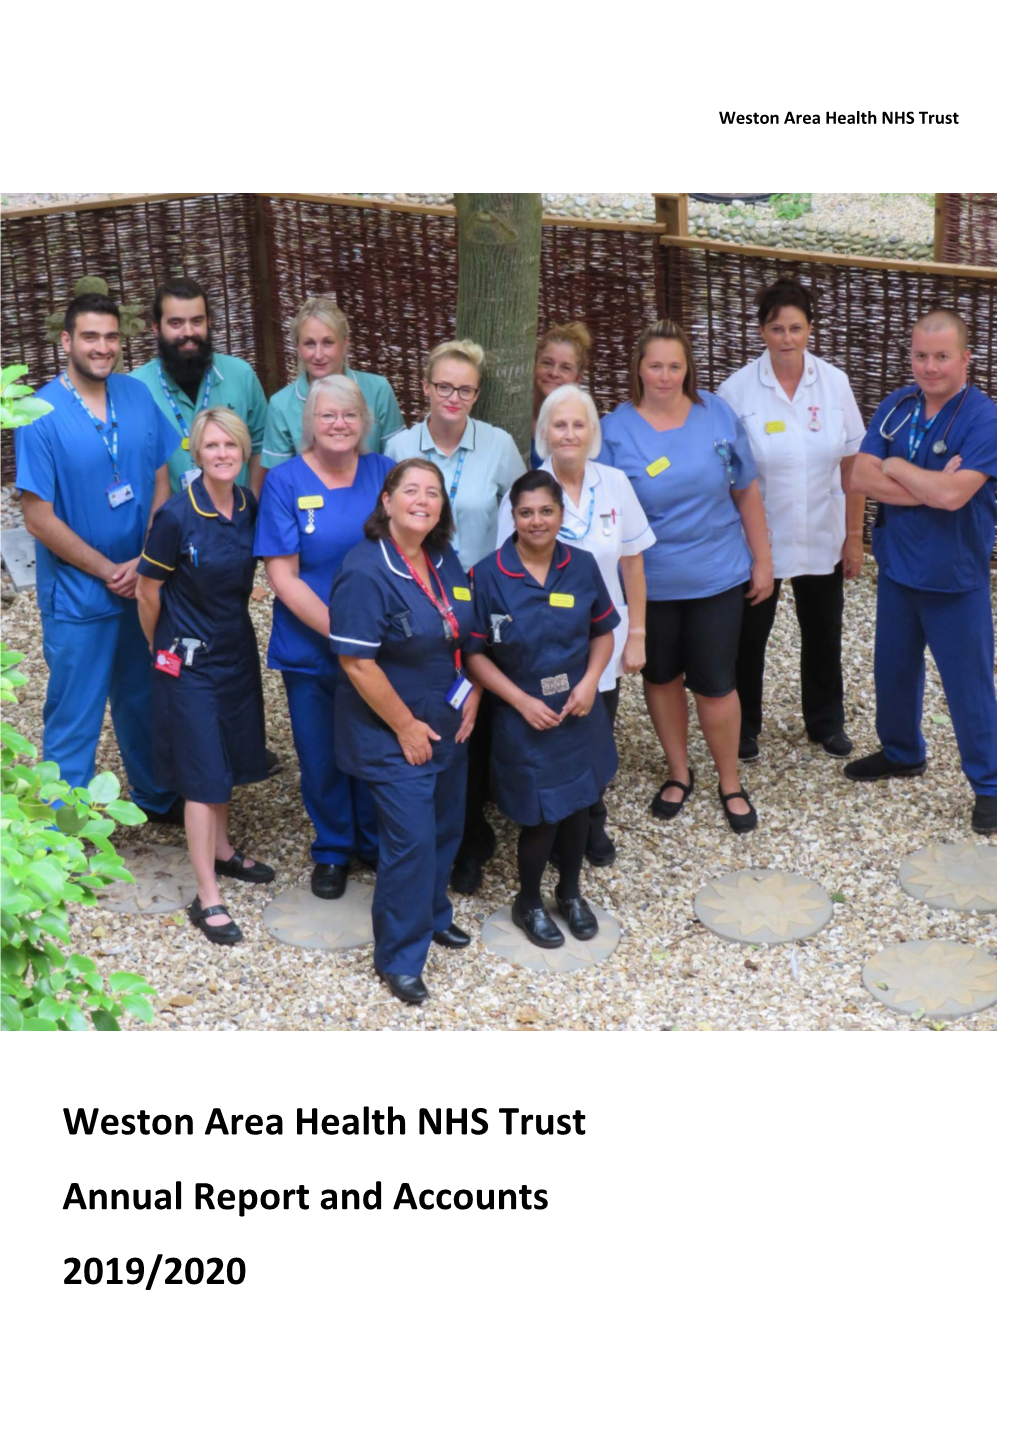 Weston Area Health NHS Trust Annual Report and Accounts 2019/2020